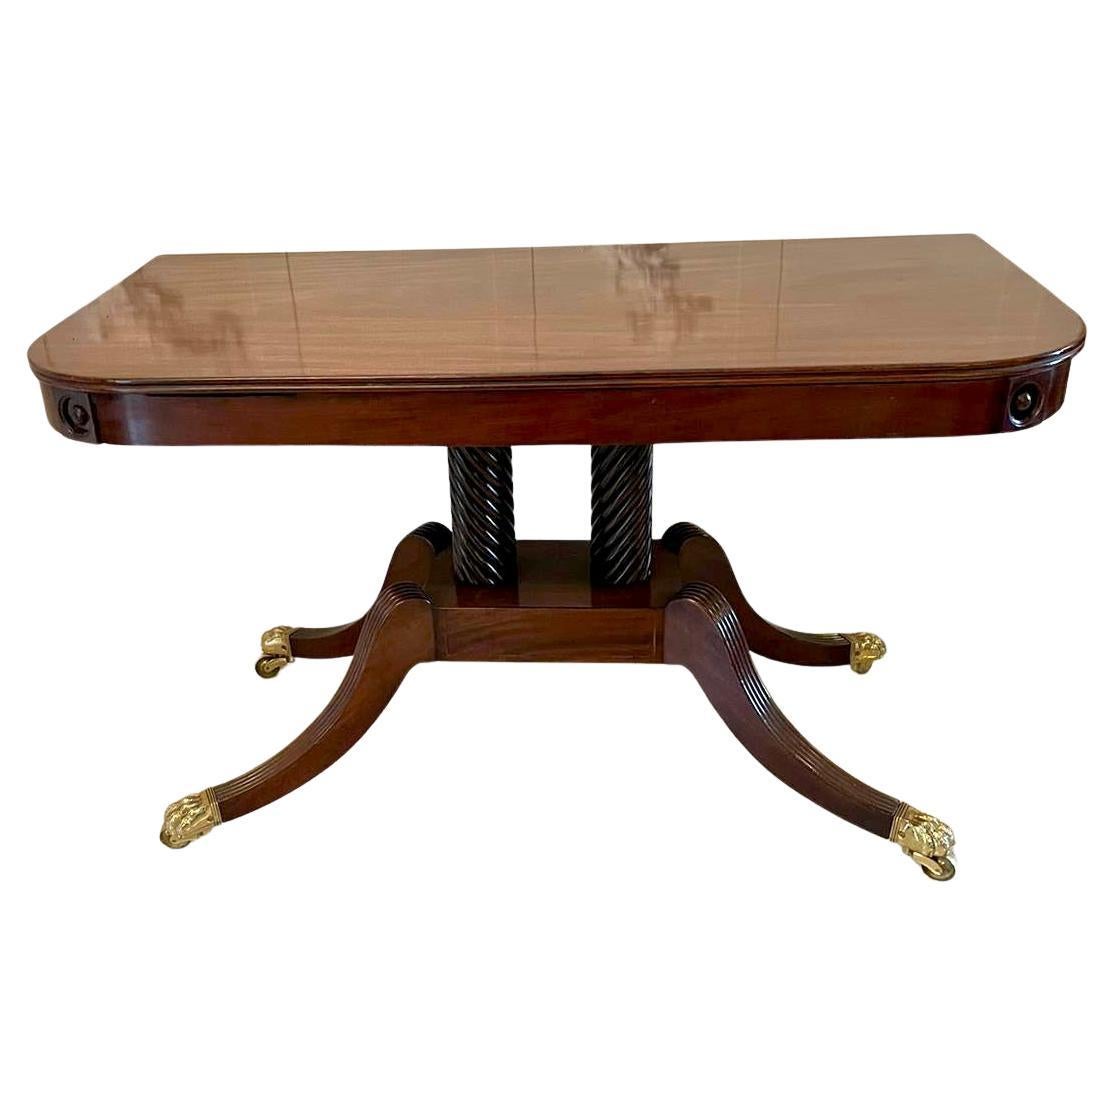 Rare and Unusual Antique Regency Quality Mahogany Shaped Metamorphic Table For Sale